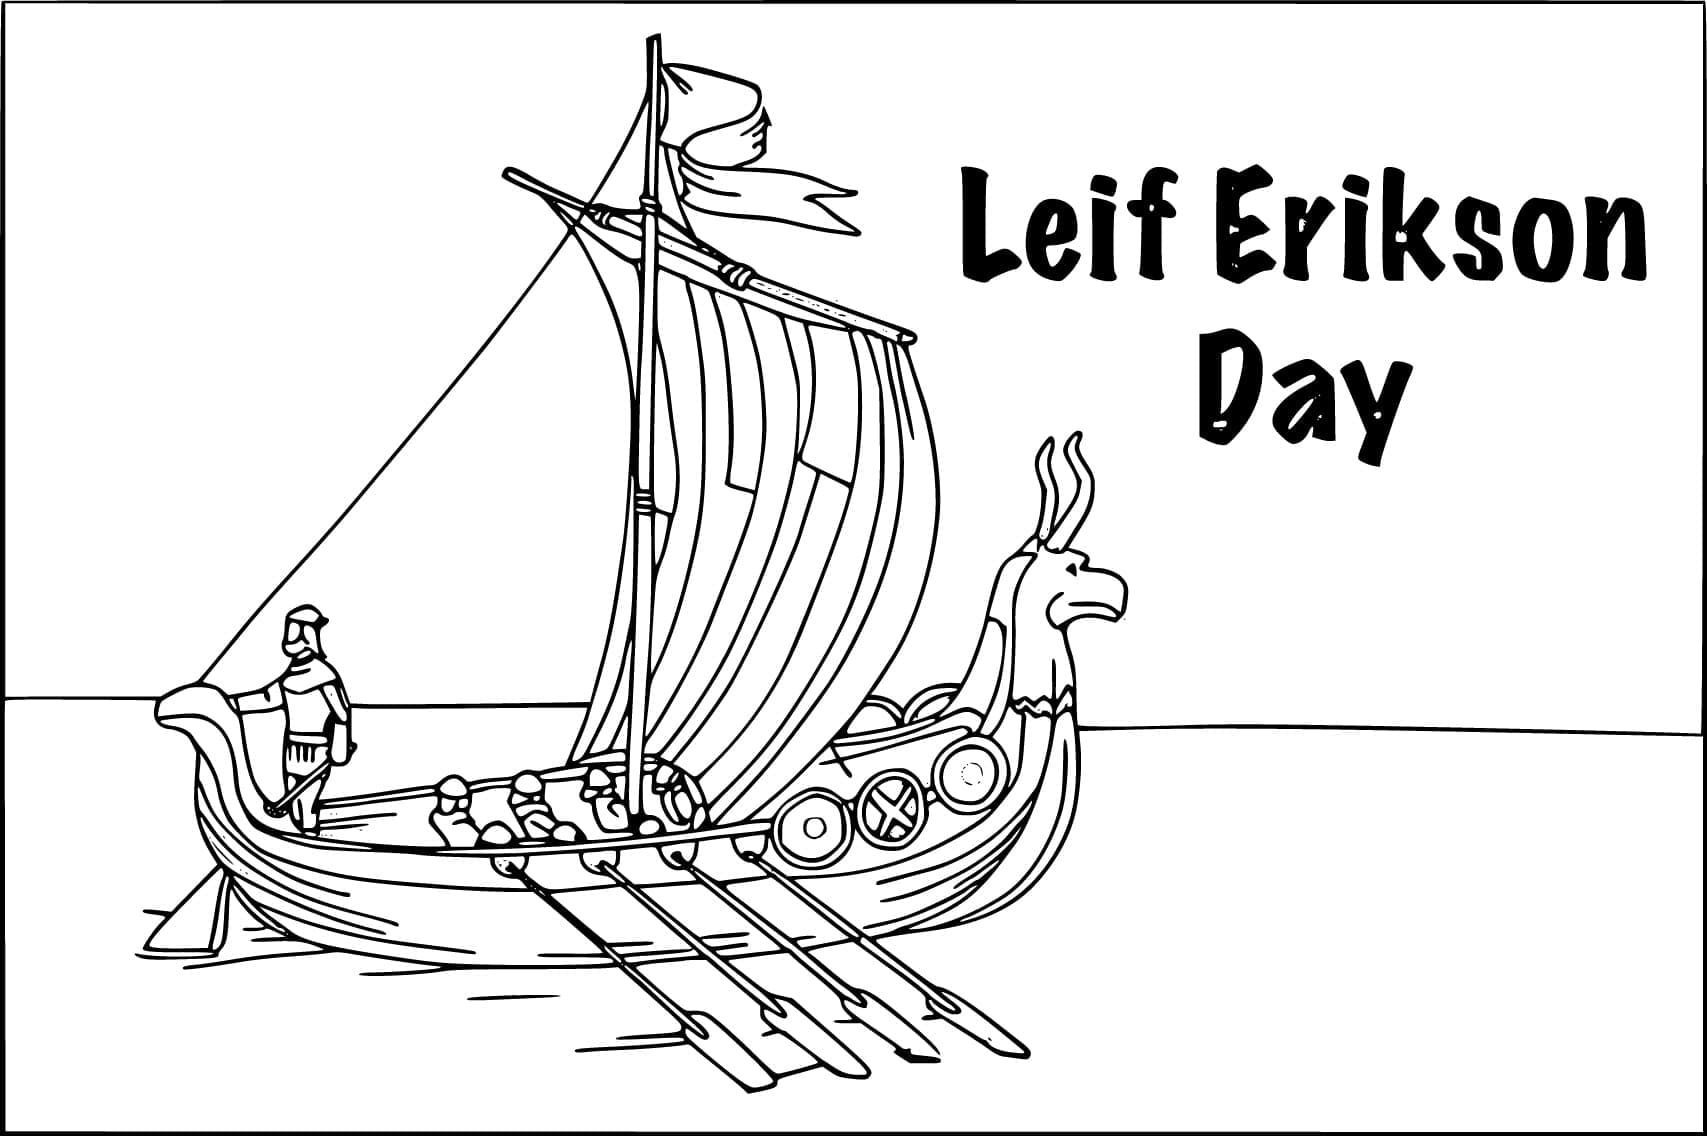 Leif Erikson Day coloring page